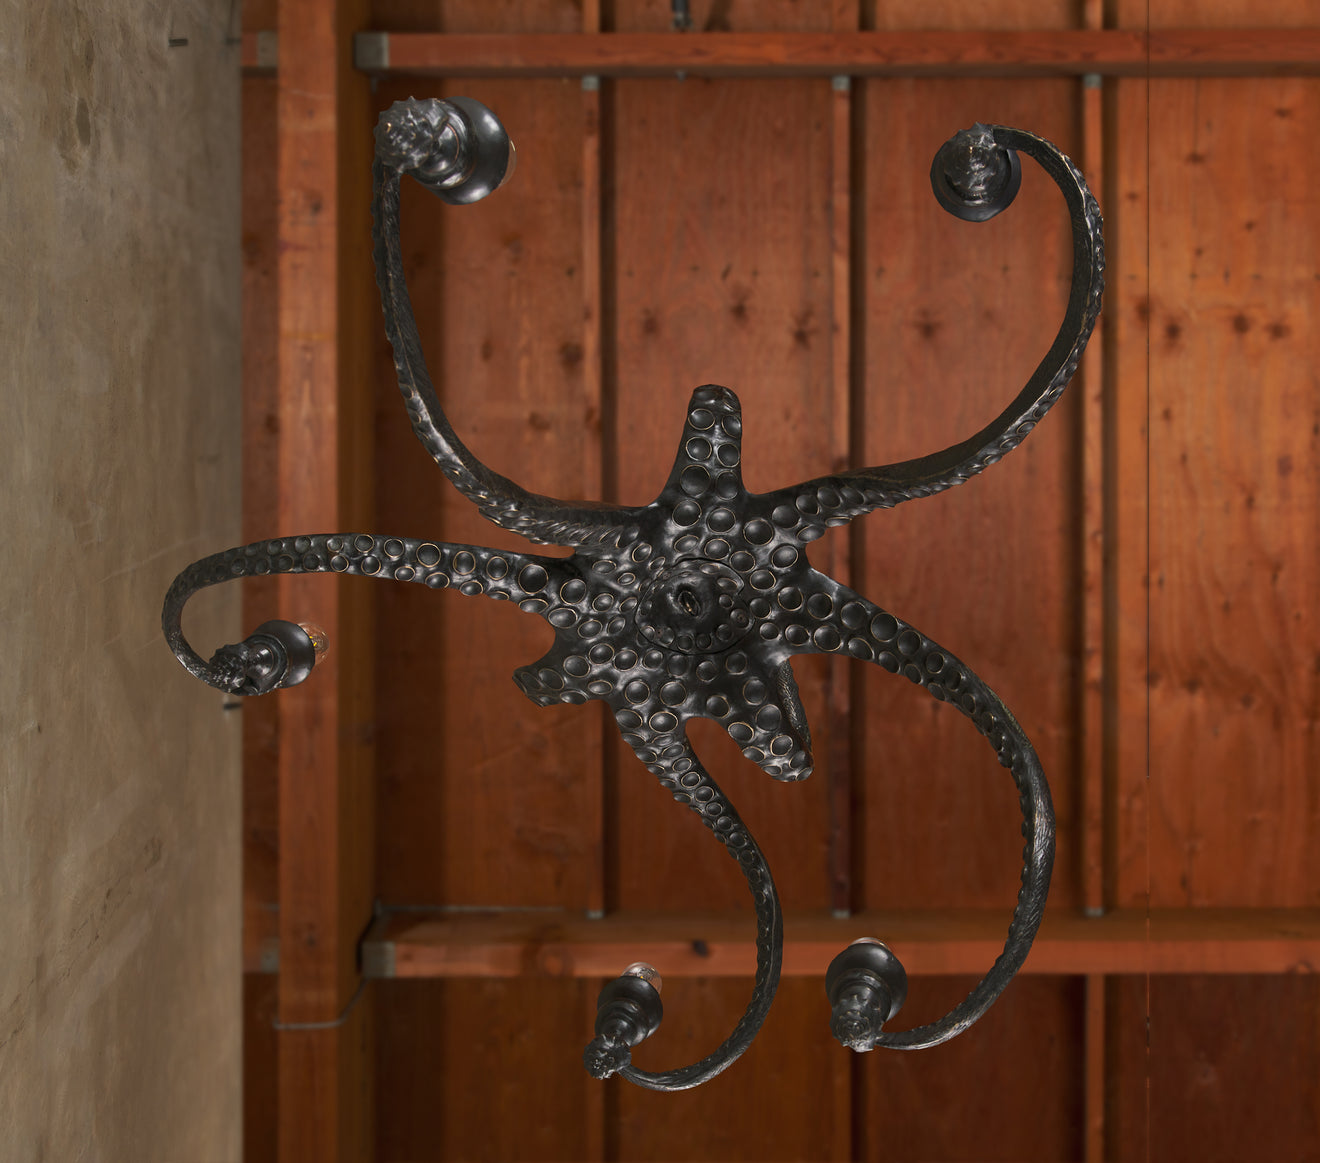 LIFESIZE OCTOPUS CHANDELIER BY BRADLEY CLIFFORD